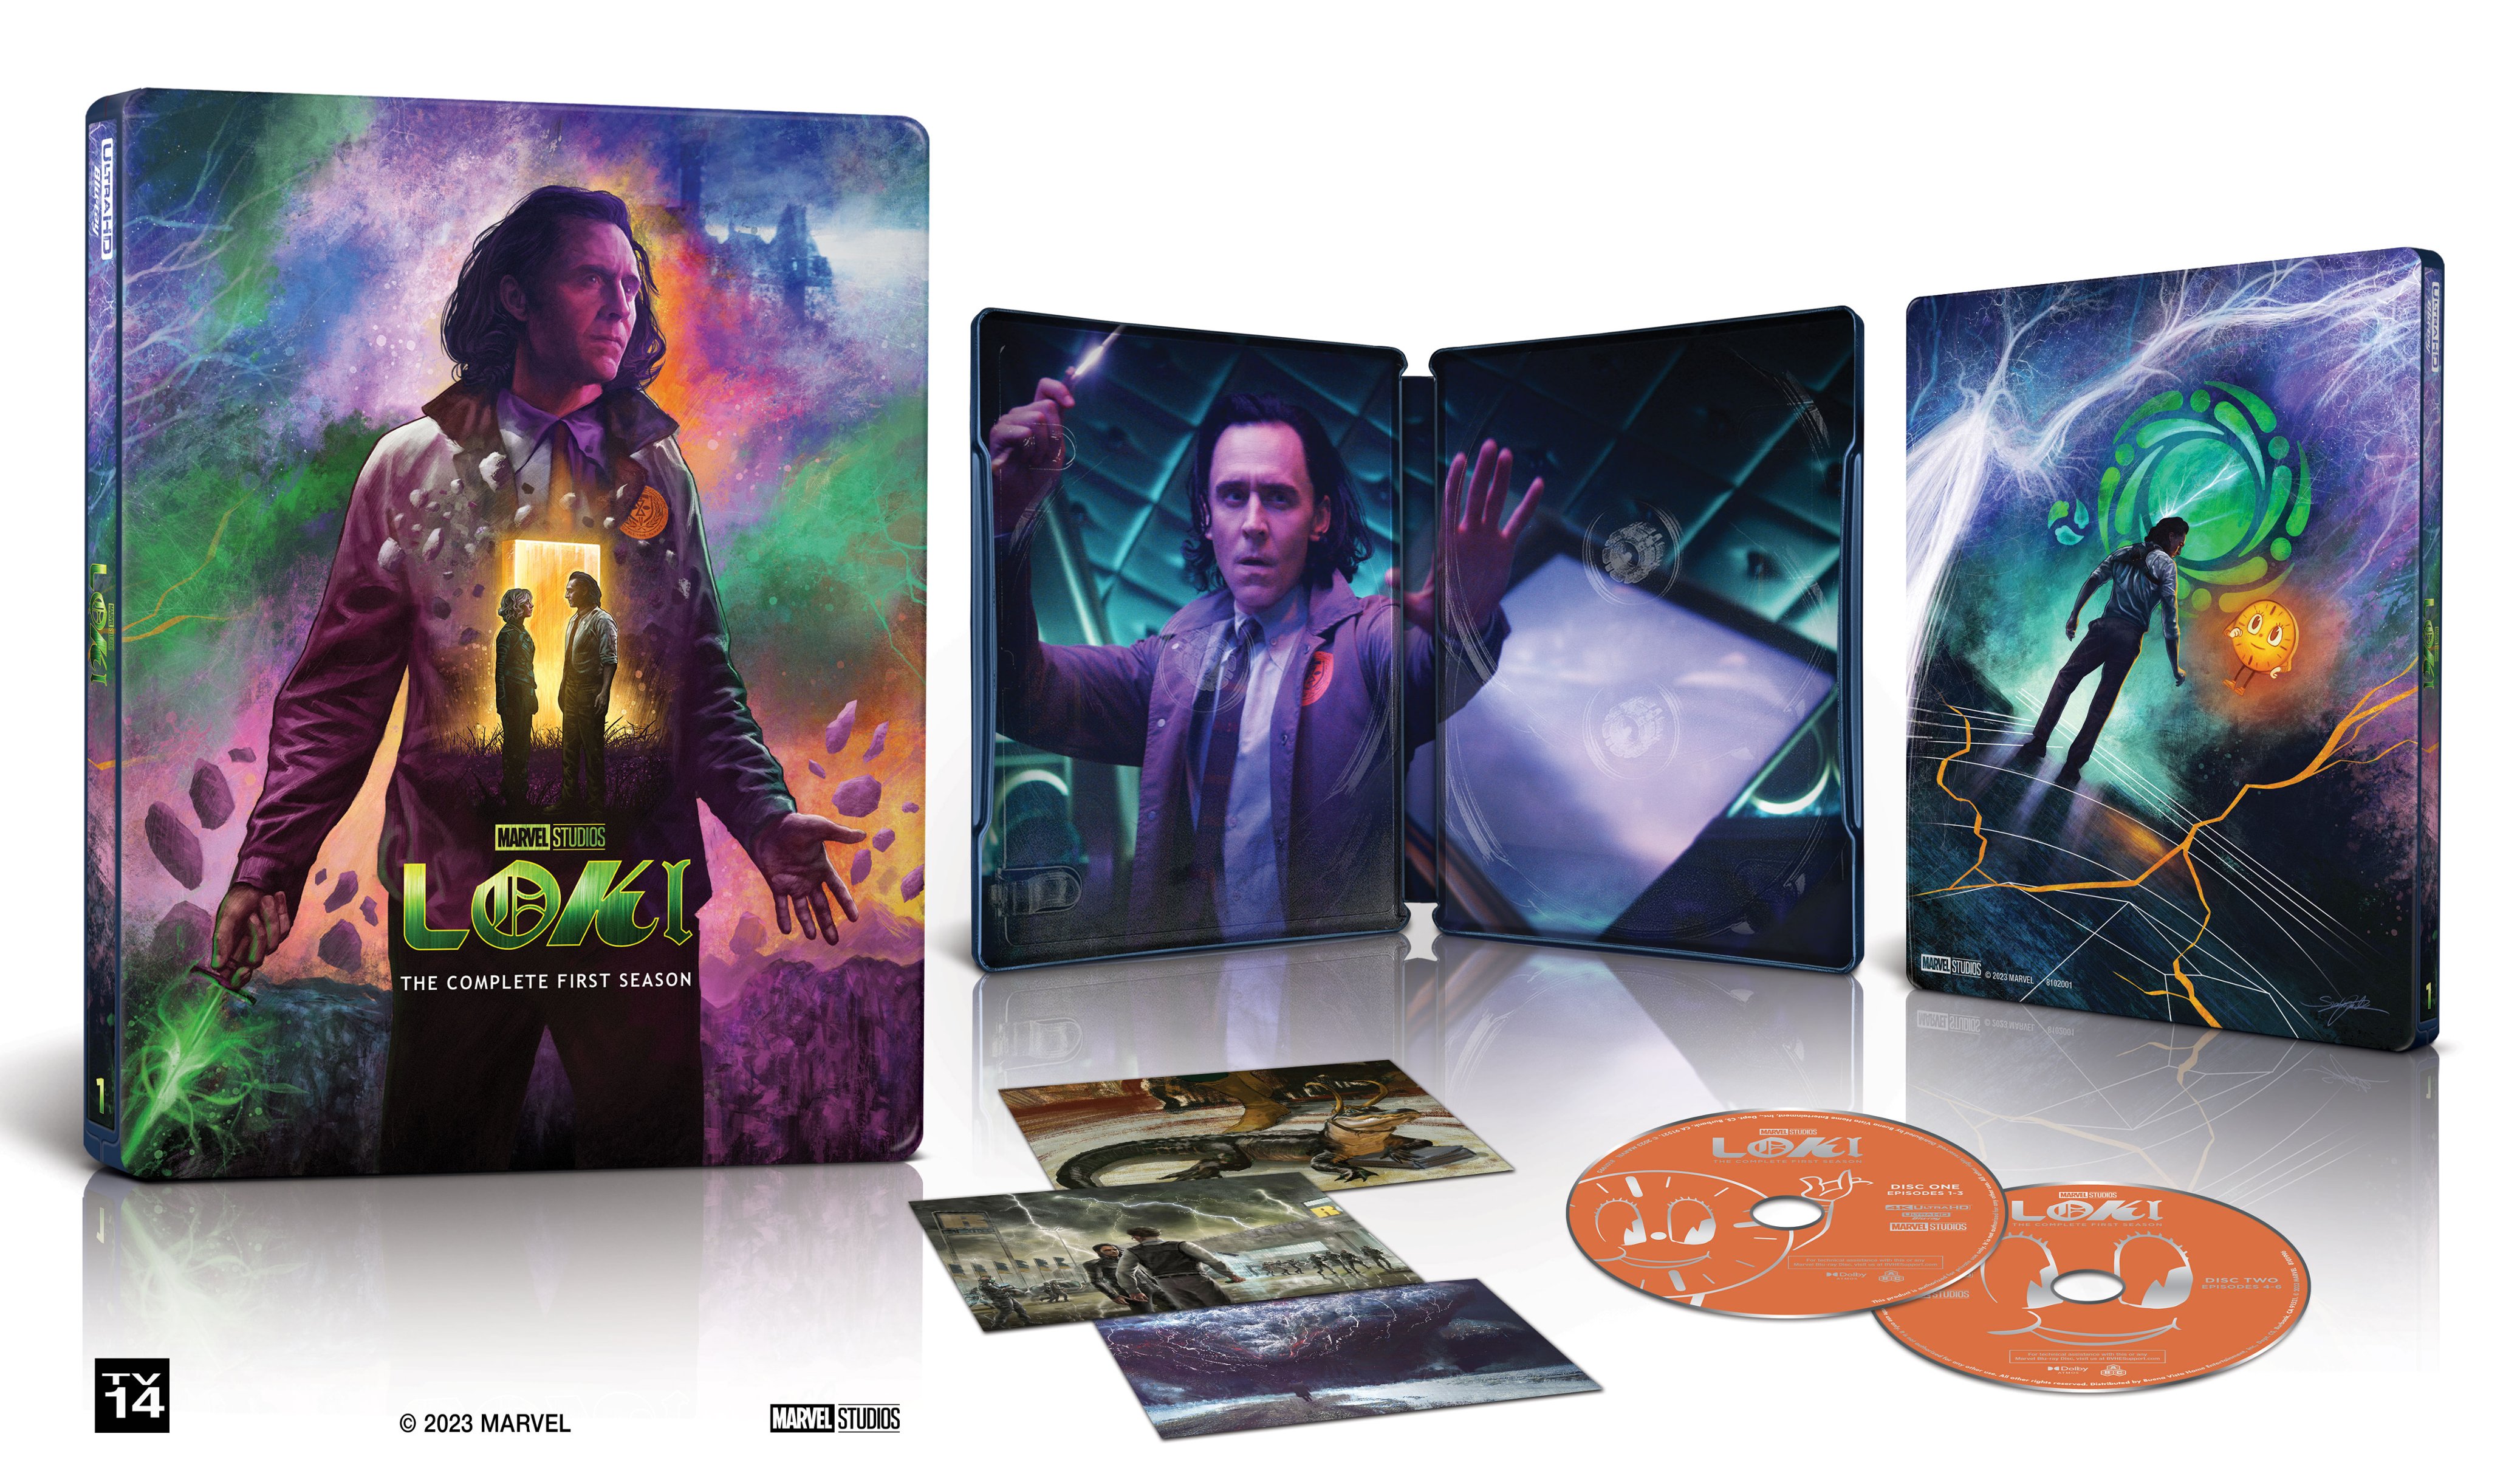 Loki 4K Steelbook Edition Is Available Now, And It's Discounted - GameSpot